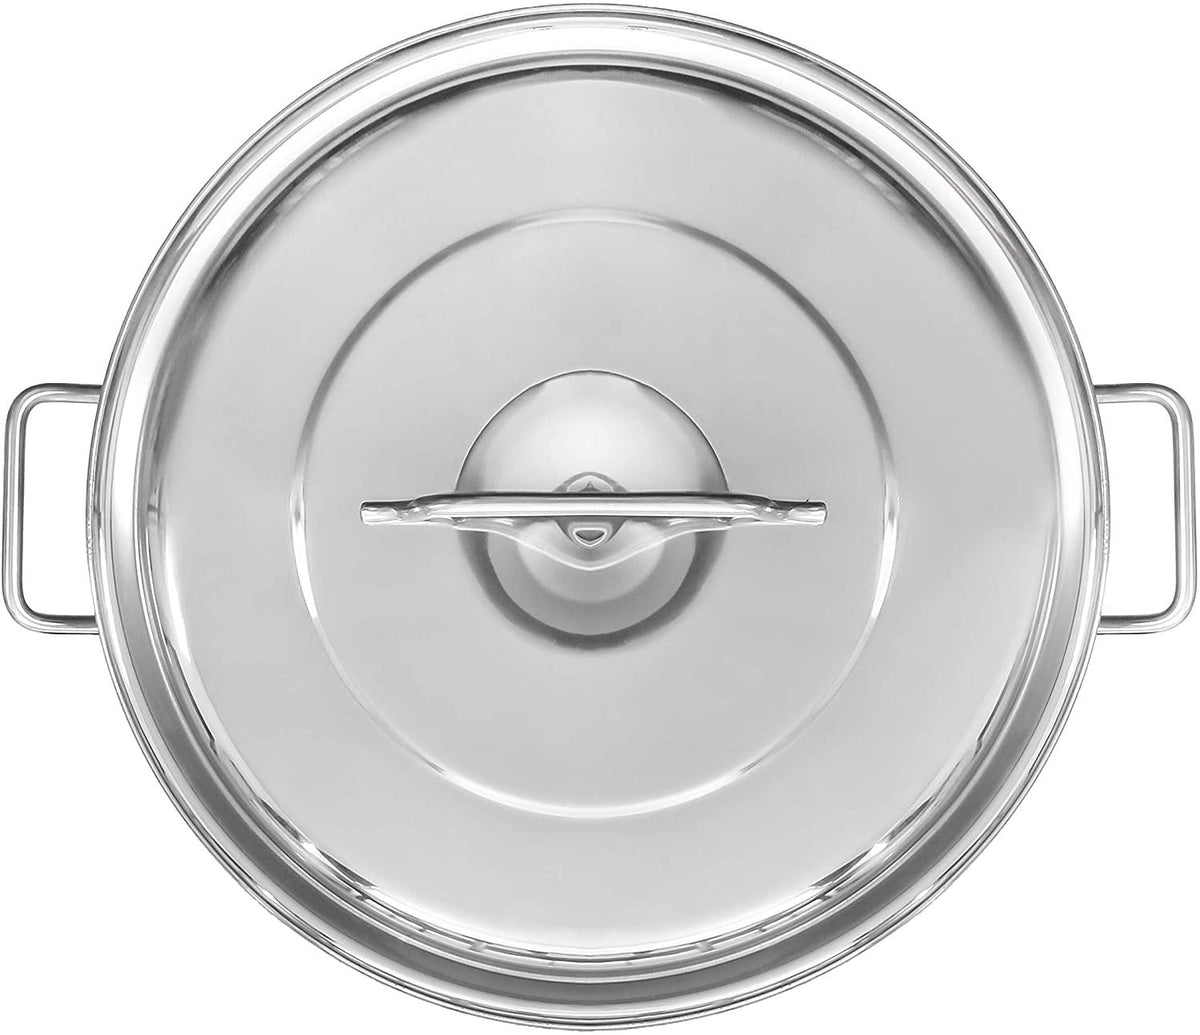 21/32/53/73/104 QT Stainless Steel Stockpot Lid Strainer Basket Soup S –  XtremepowerUS